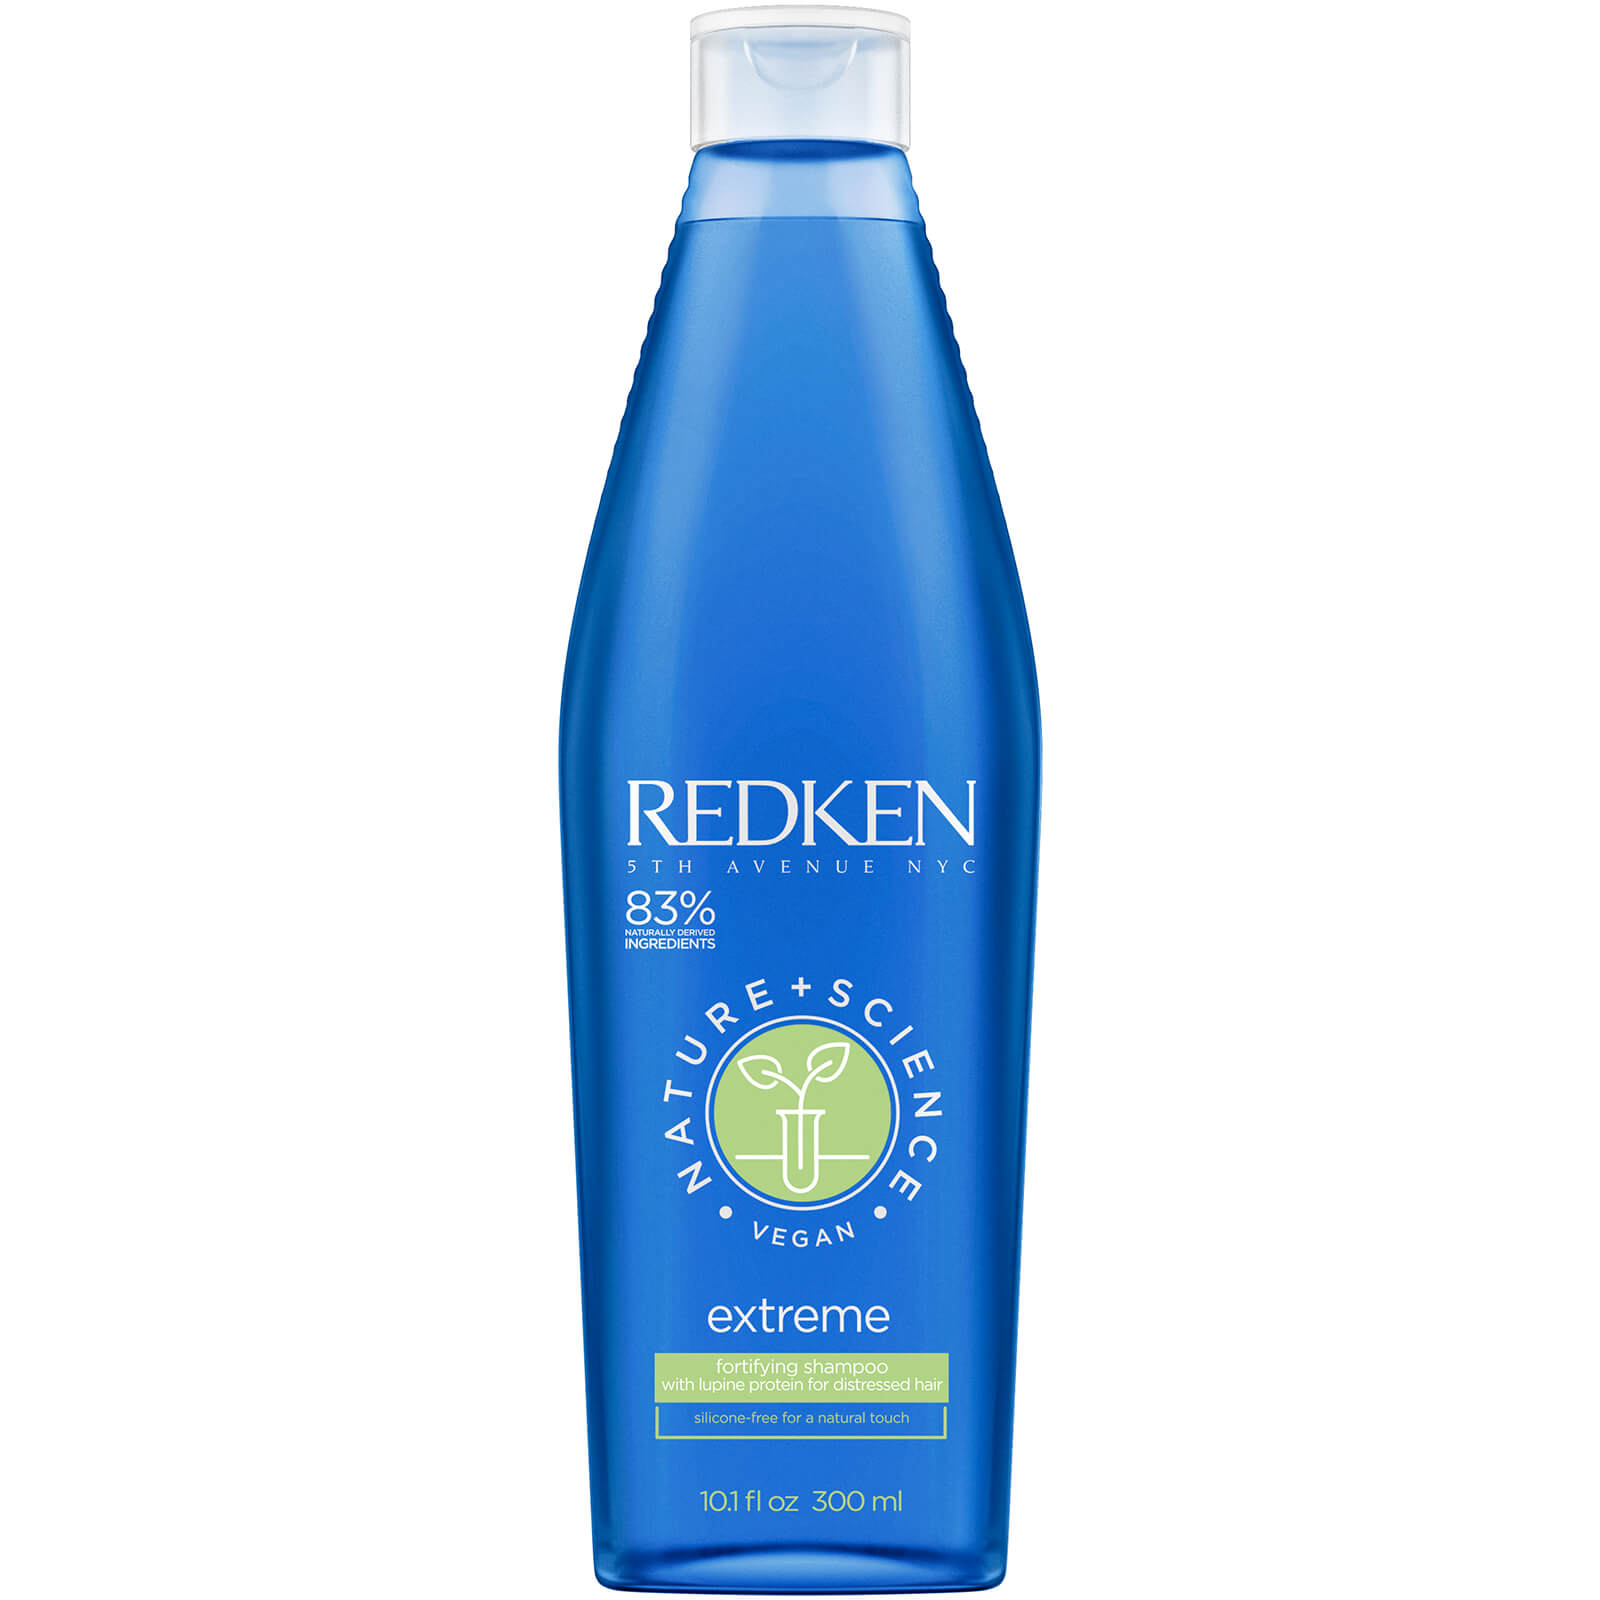 Redken Nature Science Extreme shampoo 300ml